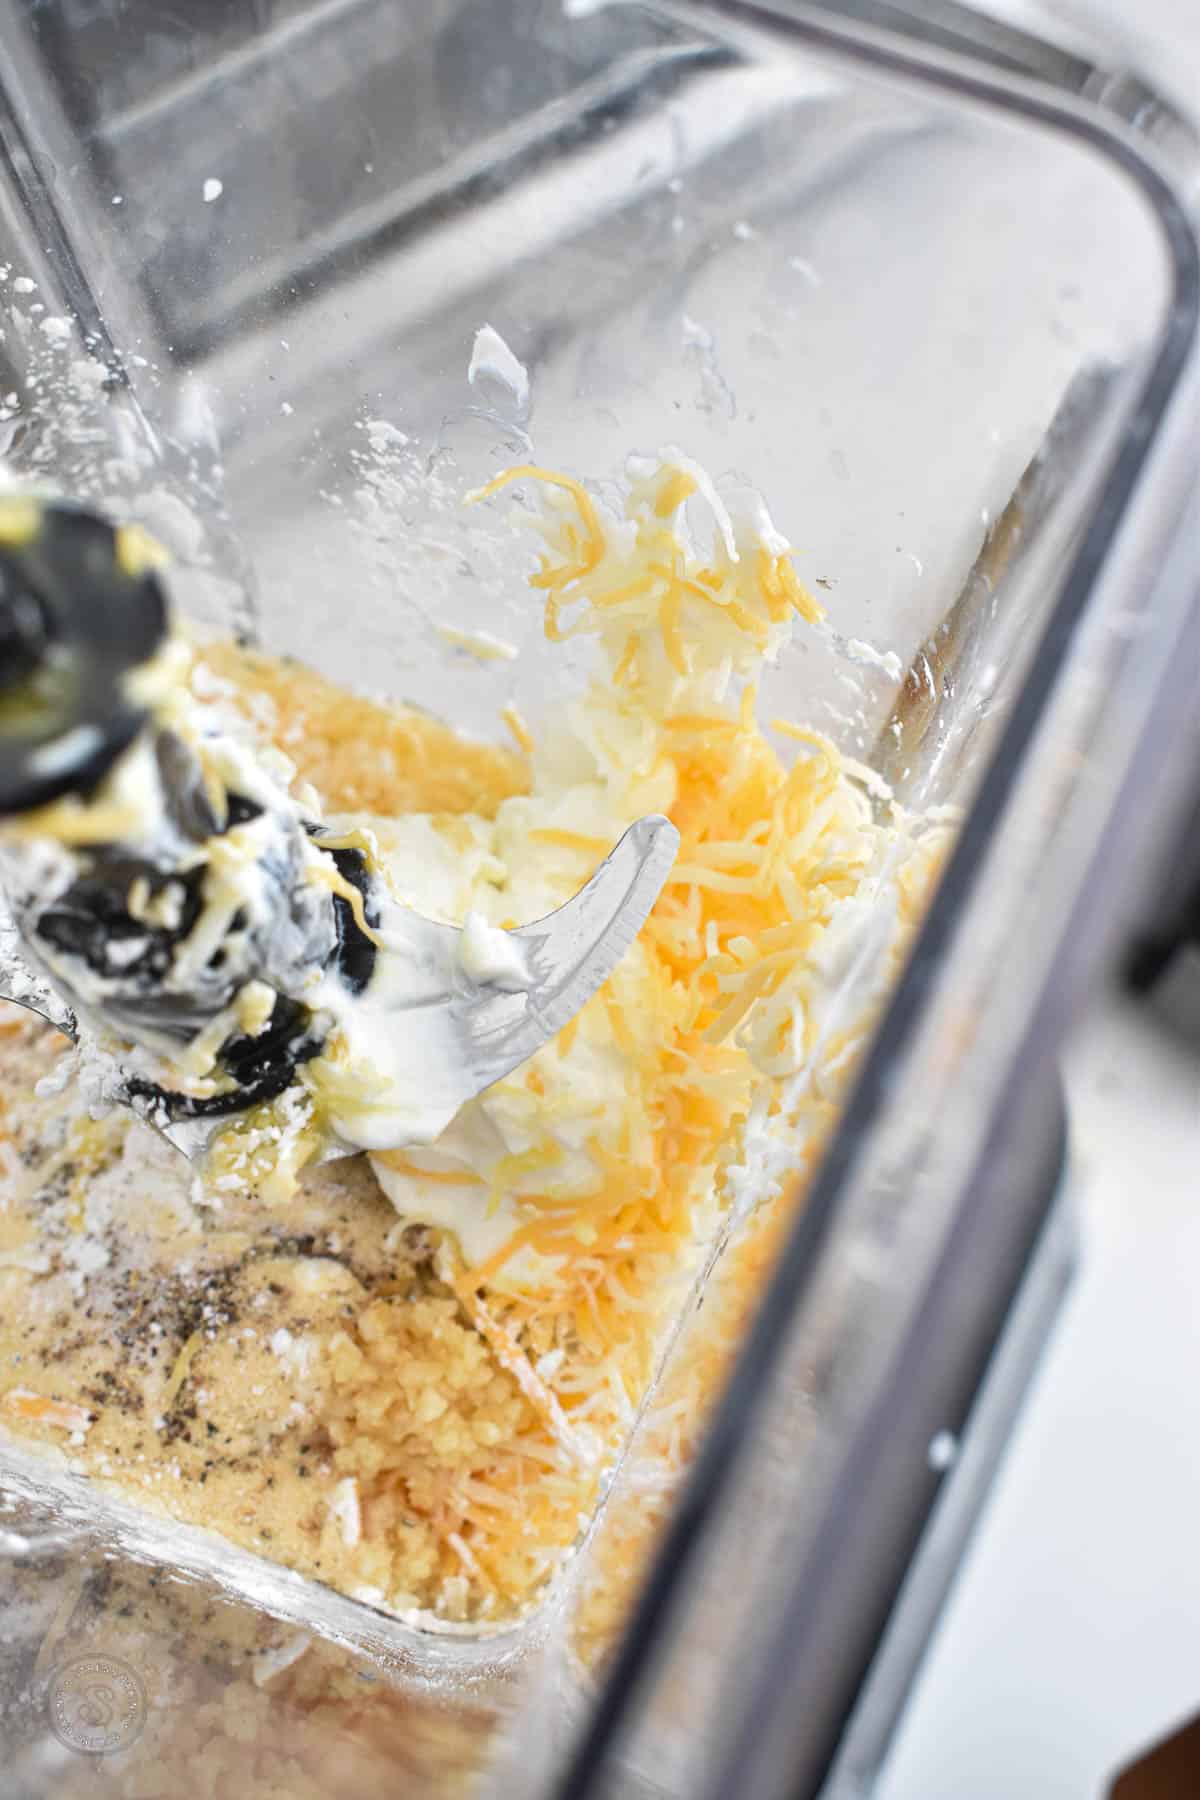 Yellow wet ingredients like yogurt and shredded cheese in a blender